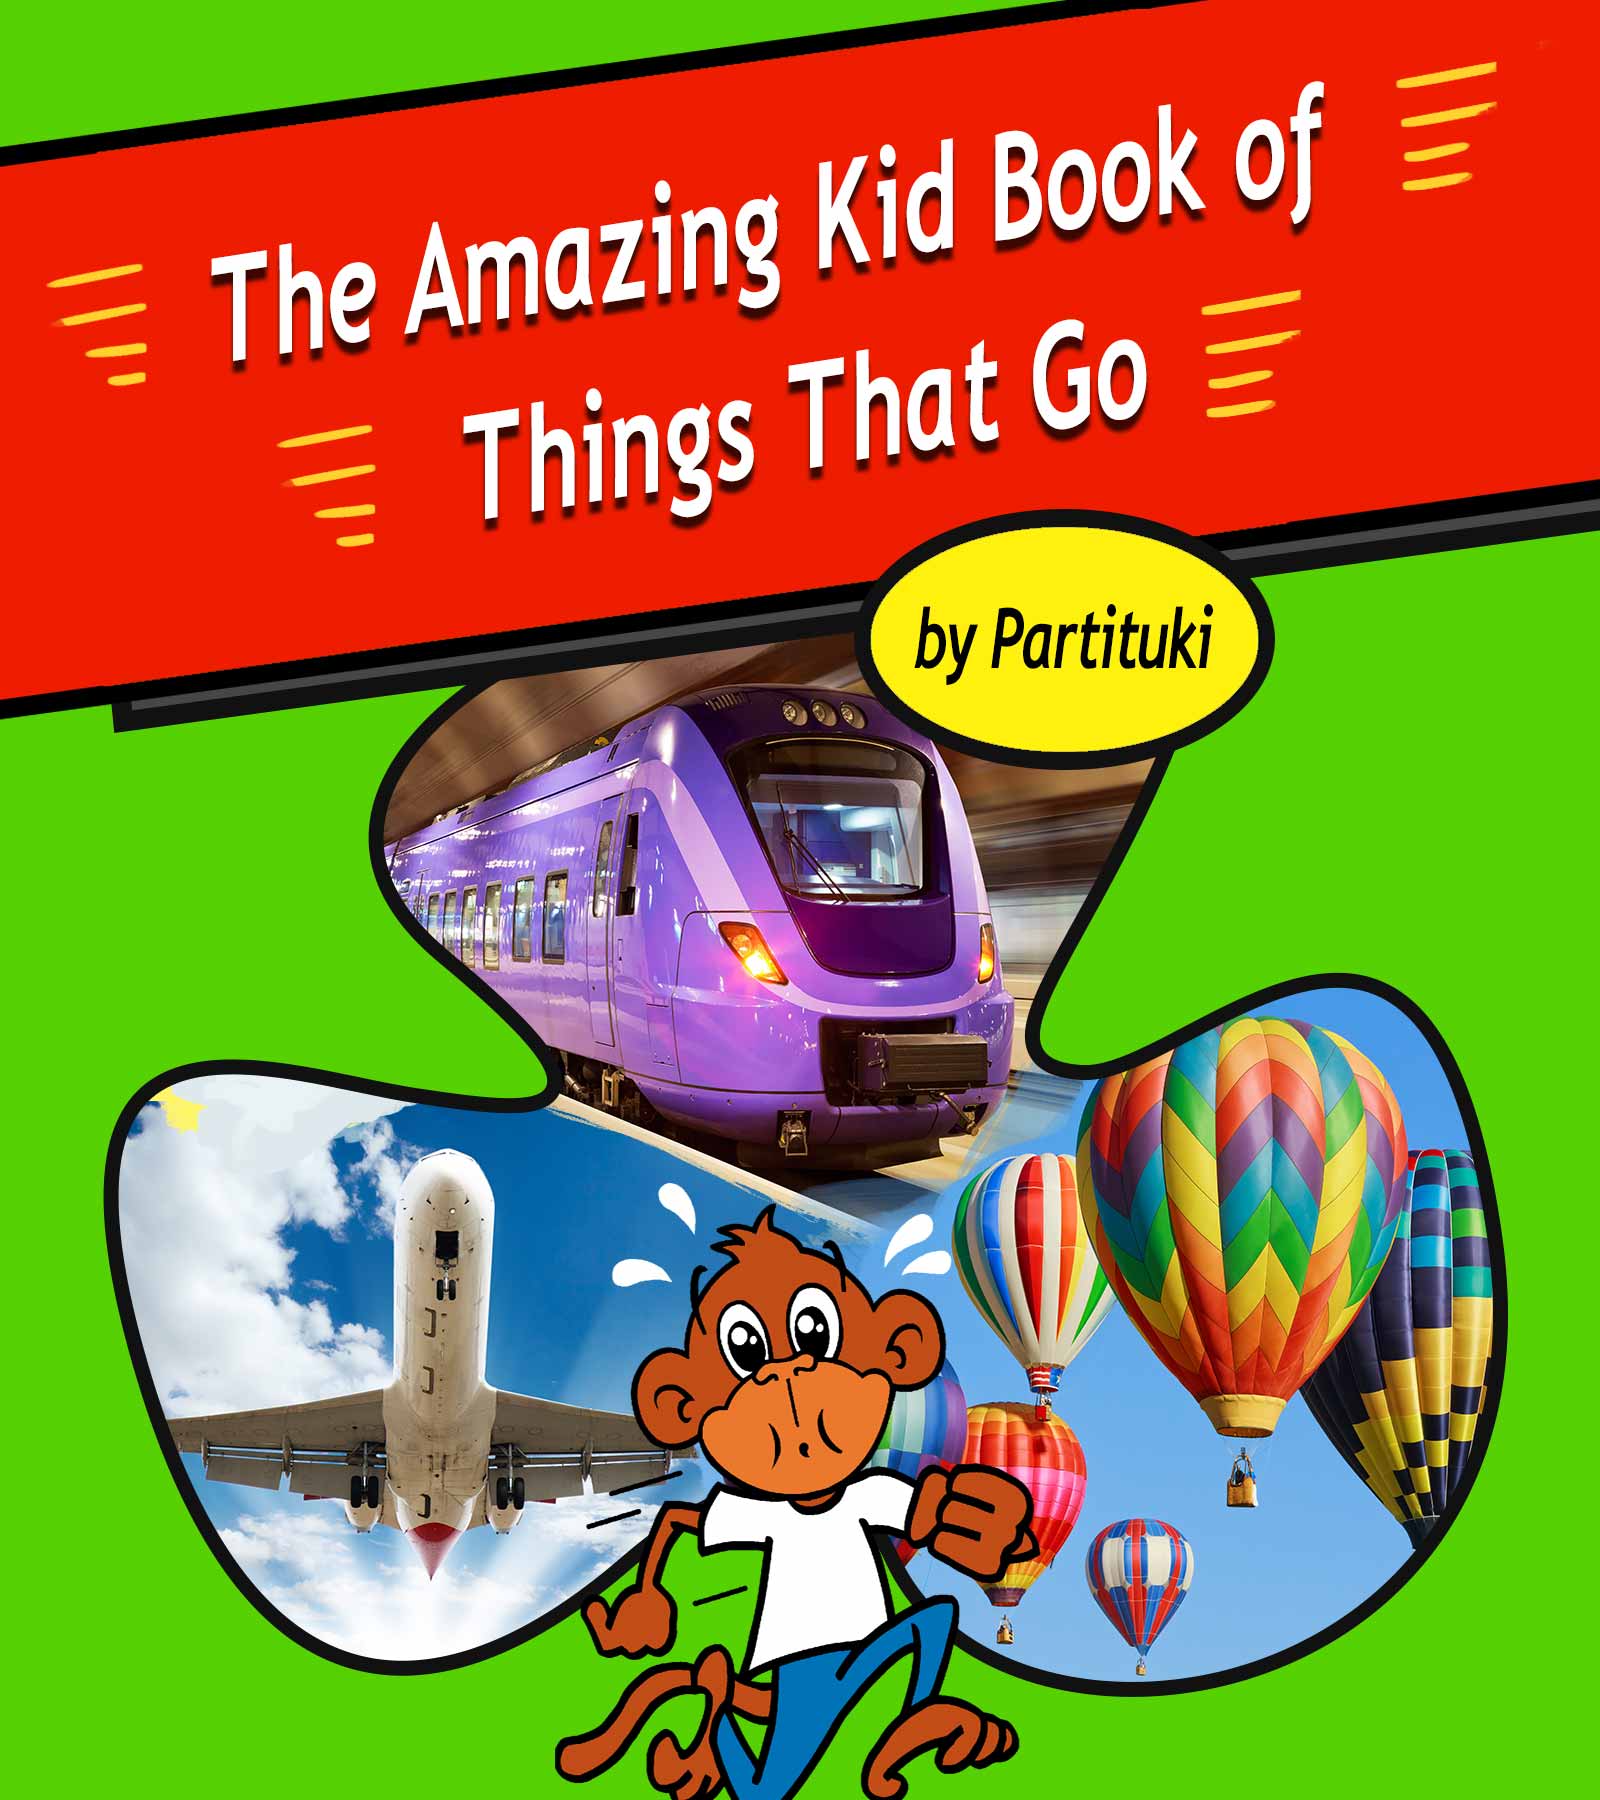 FREE: The amazing kid book of things that go by Partituki